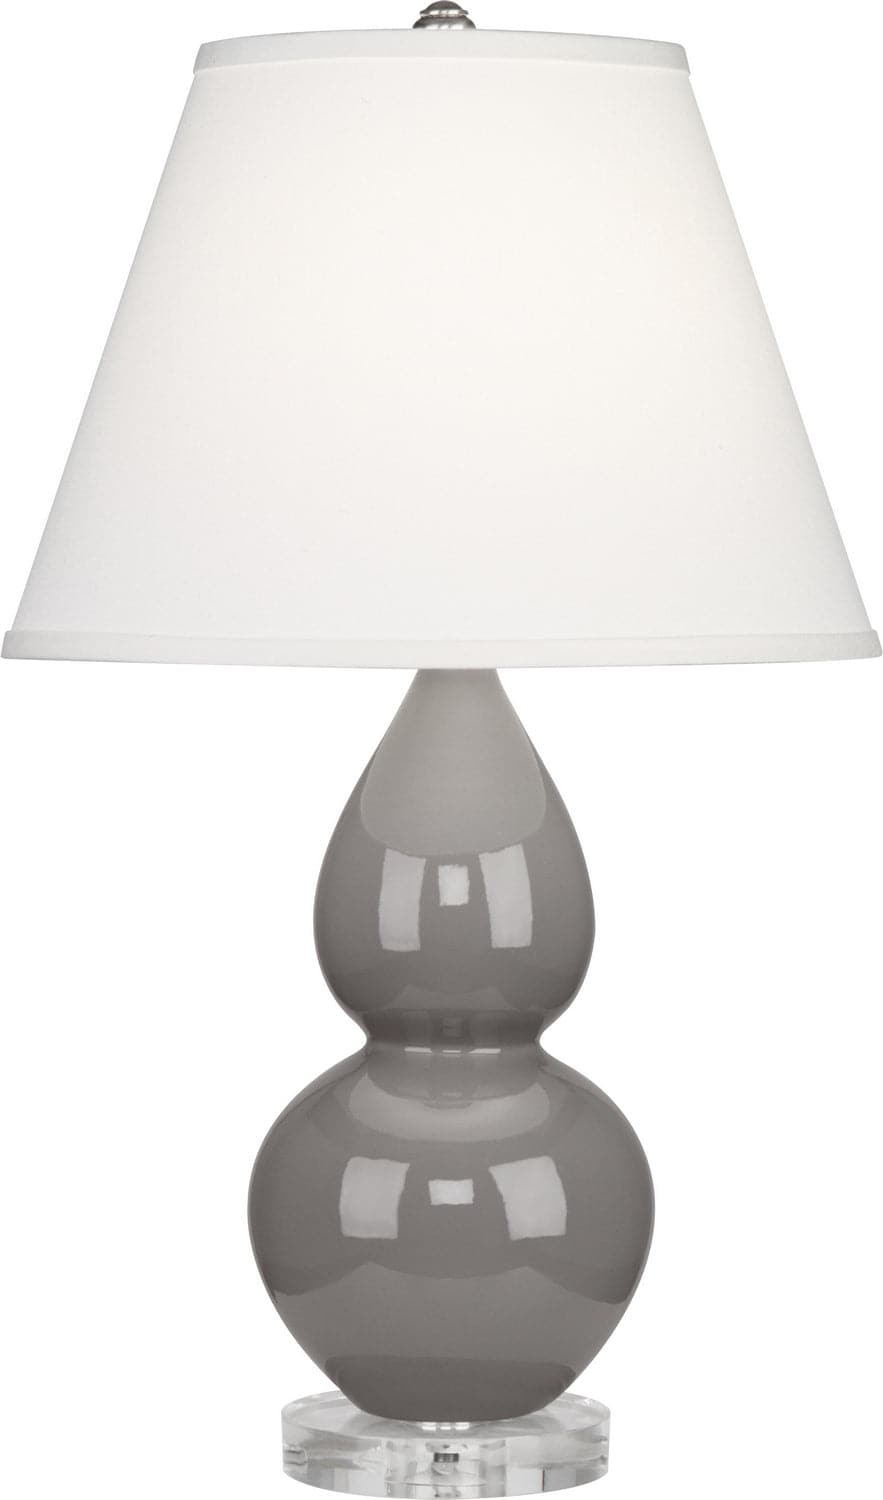 Robert Abbey - A770X - One Light Accent Lamp - Small Double Gourd - Smoky Taupe Glazed w/Lucite Base